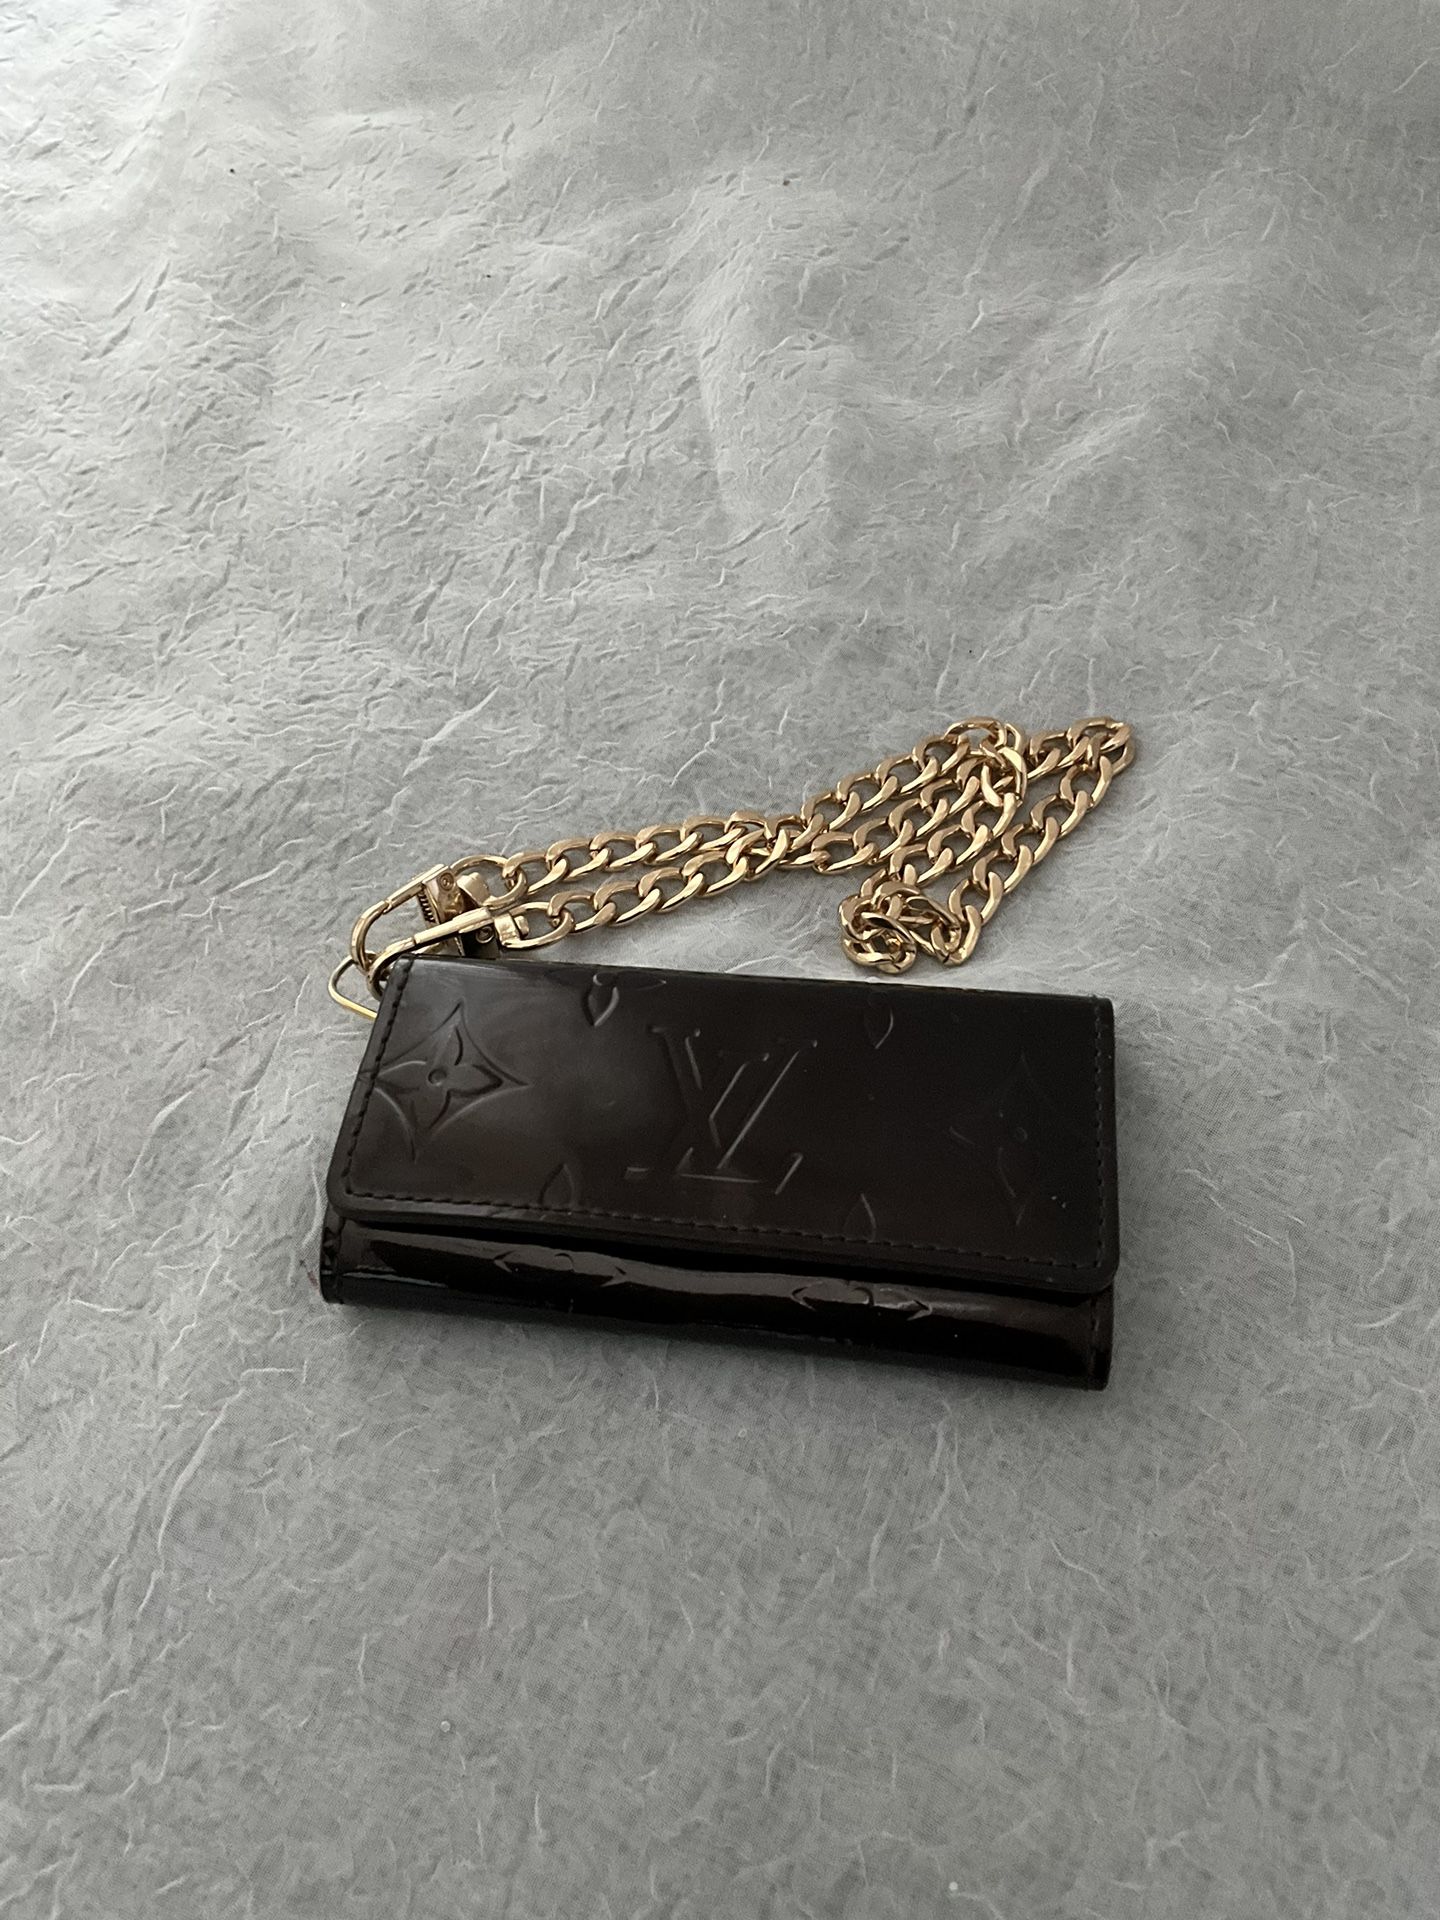 Louis Vuitton Vernis Key Holder With Complimentary Chain for Sale